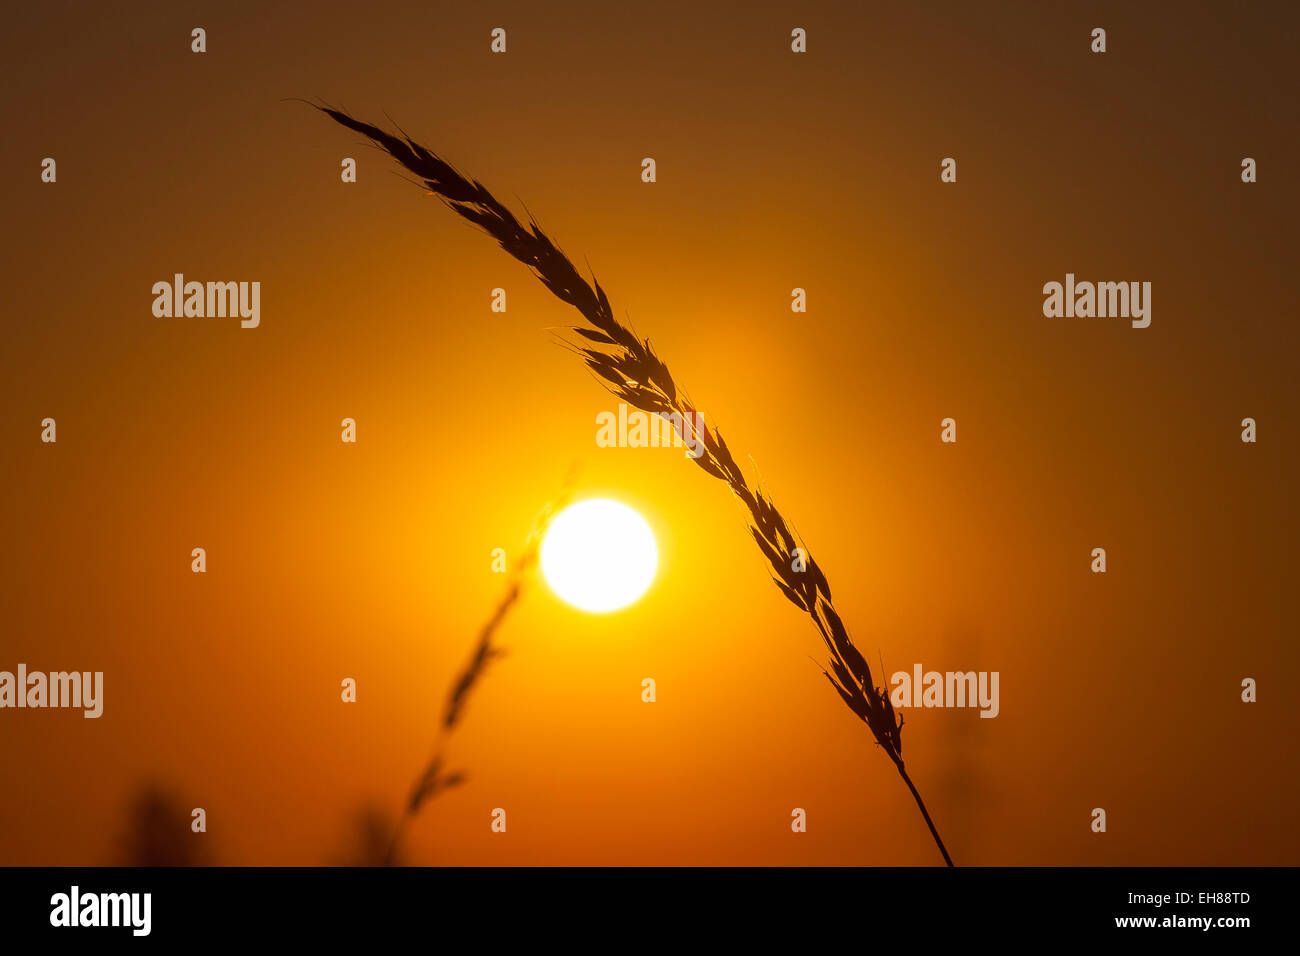 Silhouette of a blade of grass with seeds at sunrise, Saxony, Germany Stock Photo